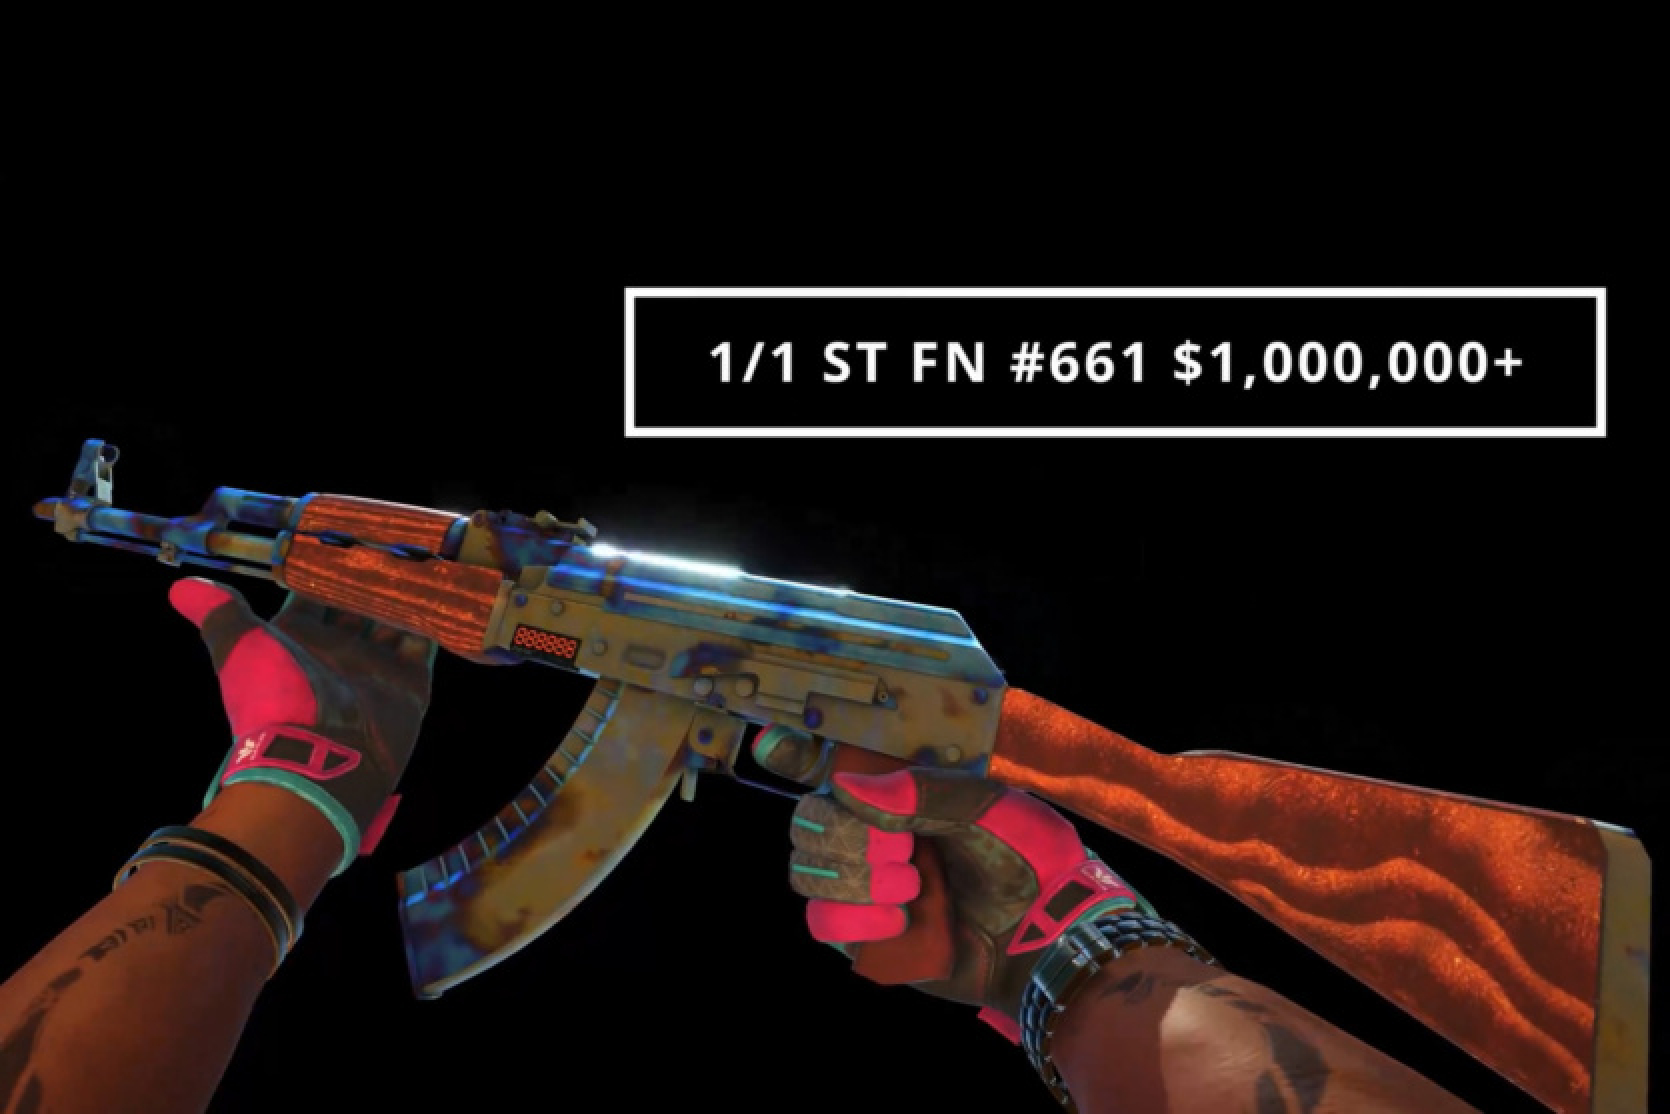 The most expensive in the world: the skin for the machine gun from Counter-Strike sold for $1 million